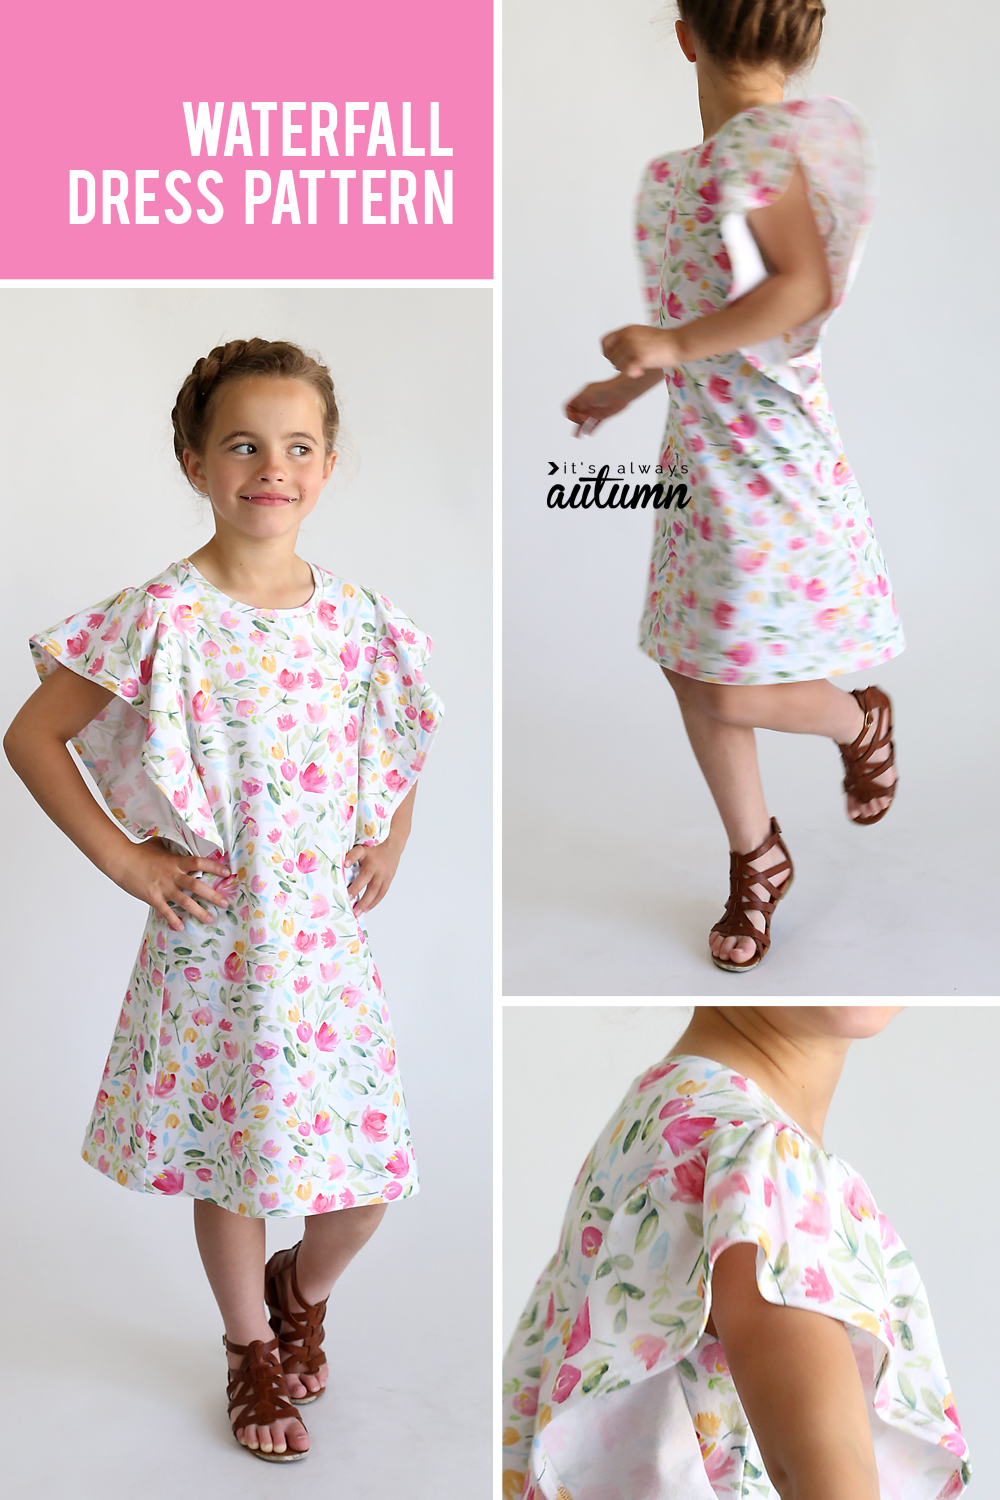 Little girl wearing a floral dress with fluttery sleeves